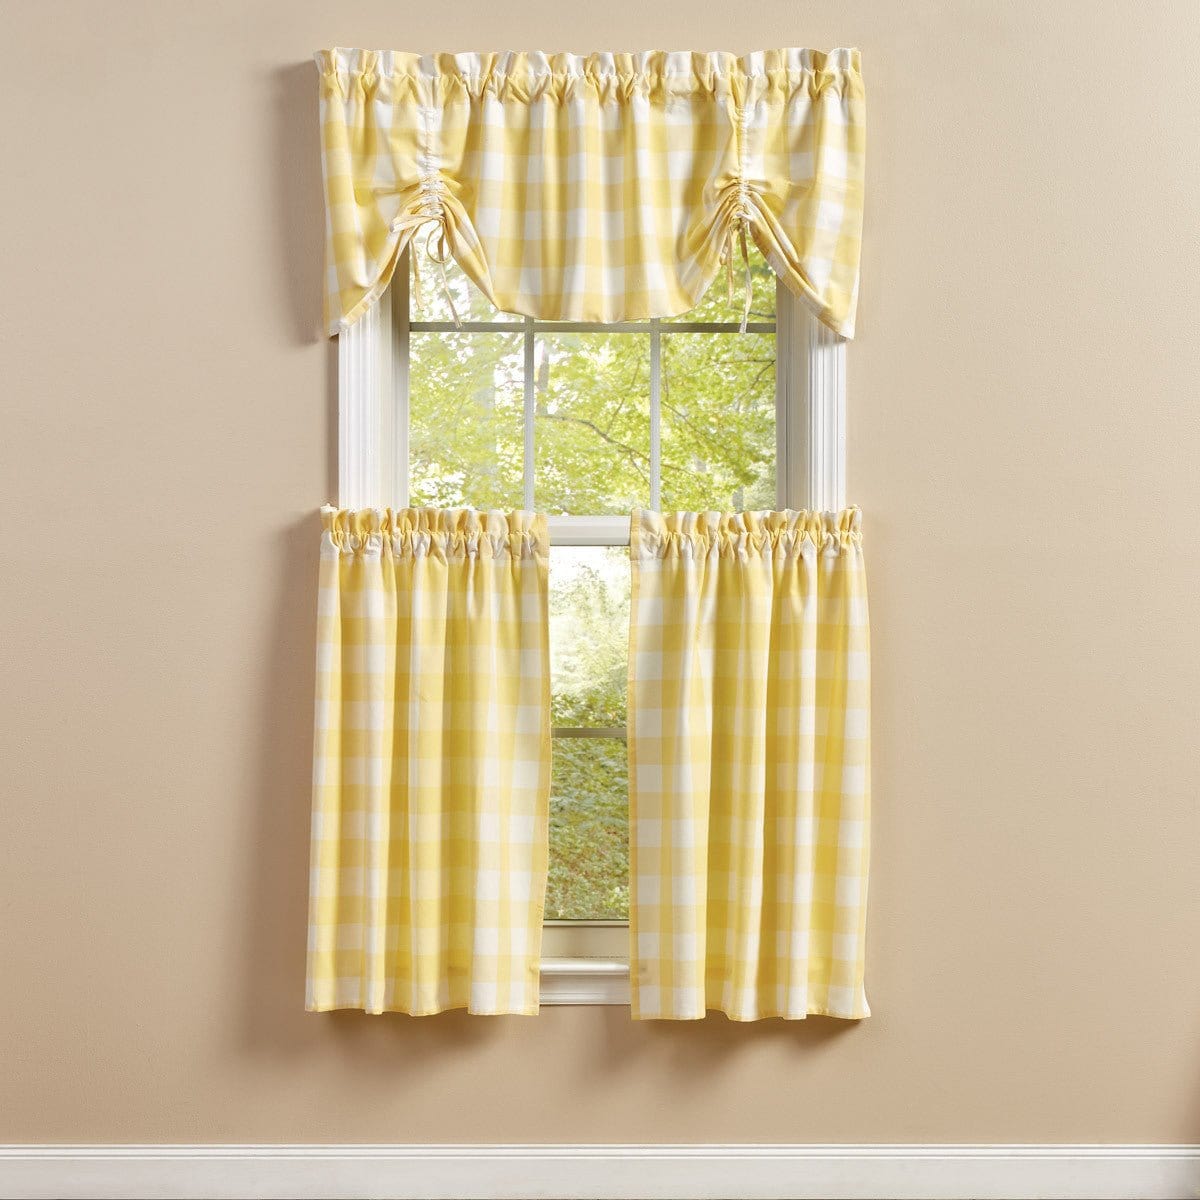 Wicklow Check in Yellow Tie Up Farmhouse Valance Lined-Park Designs-The Village Merchant